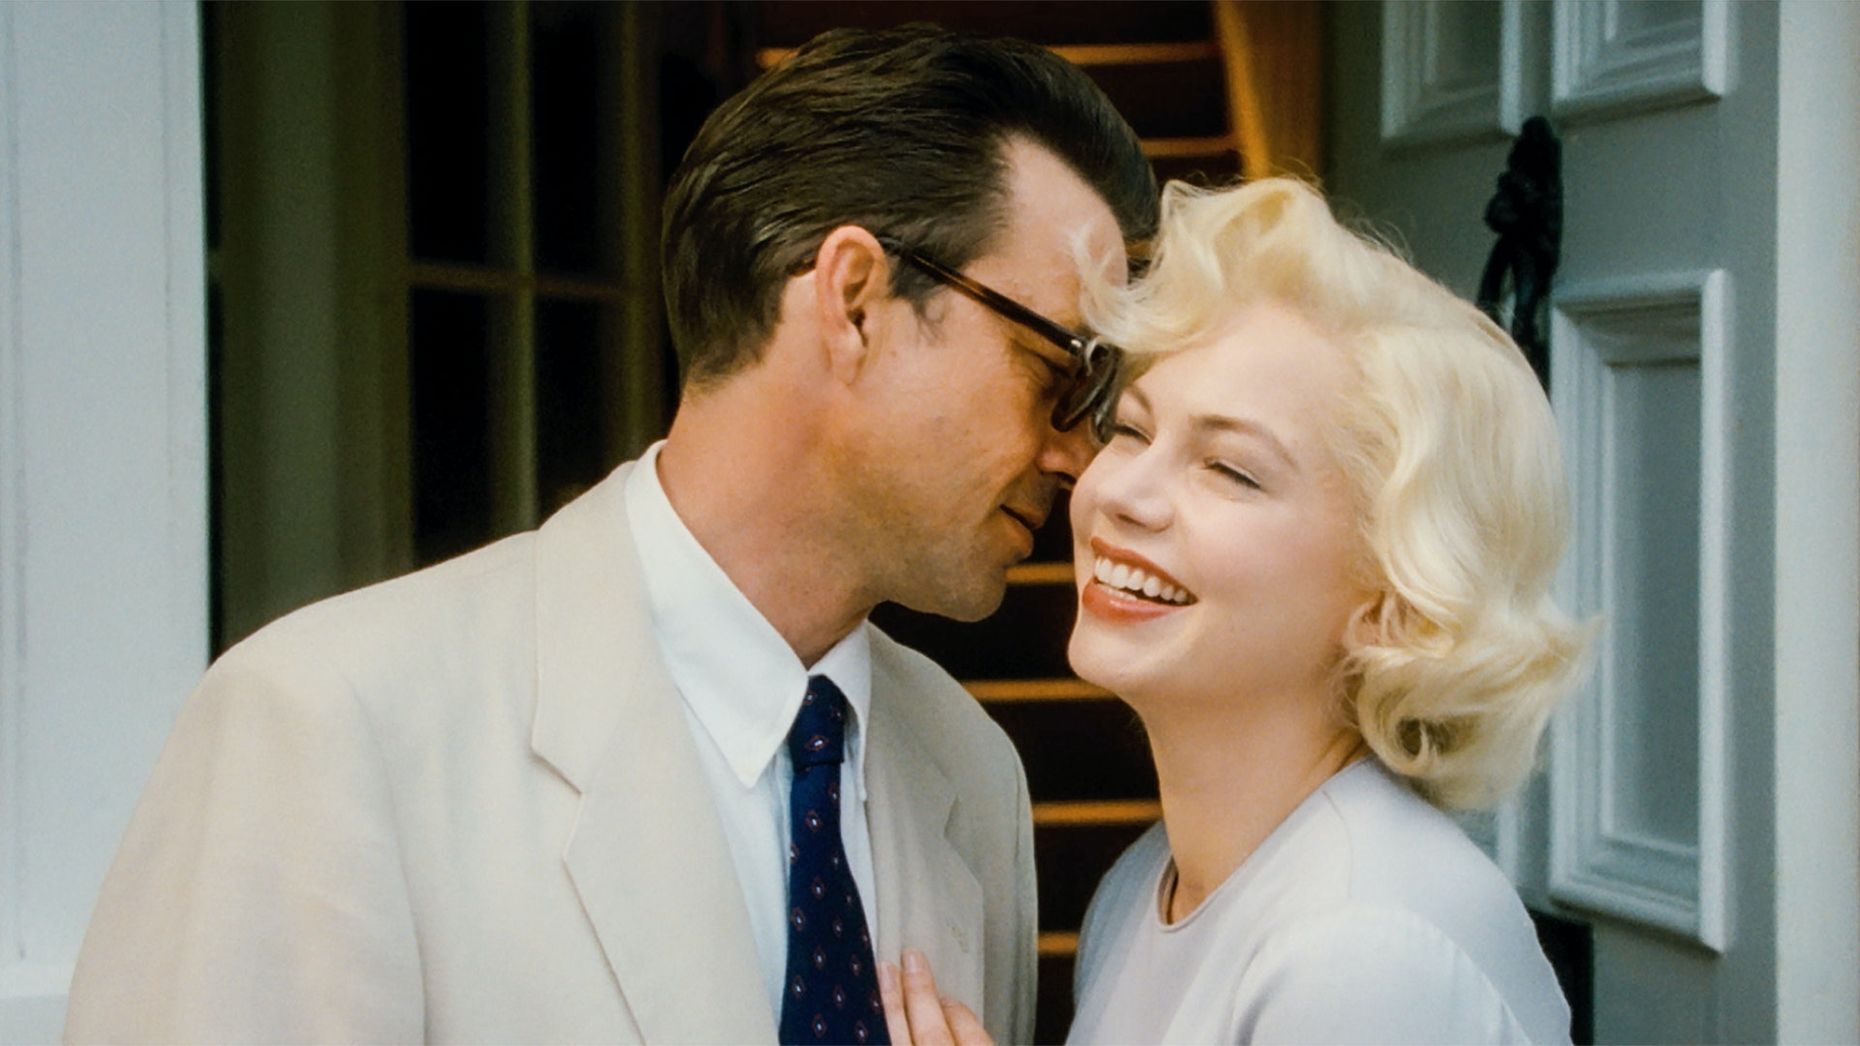 <p><em>My Week with Marilyn </em>chronicles the disastrous shooting of <em>The Prince and the Showgirl </em>in England, during which Marilyn Monroe befriended a young production staffer. Michelle Williams imbues the character with <a href="https://www.rogerebert.com/reviews/my-week-with-marilyn-2011" class="atom_link atom_valid" rel="noreferrer noopener">a vulnerability</a> that humanizes her in a way no other film has done before, and her performance earned her a Golden Globe and an Oscar nomination.</p>